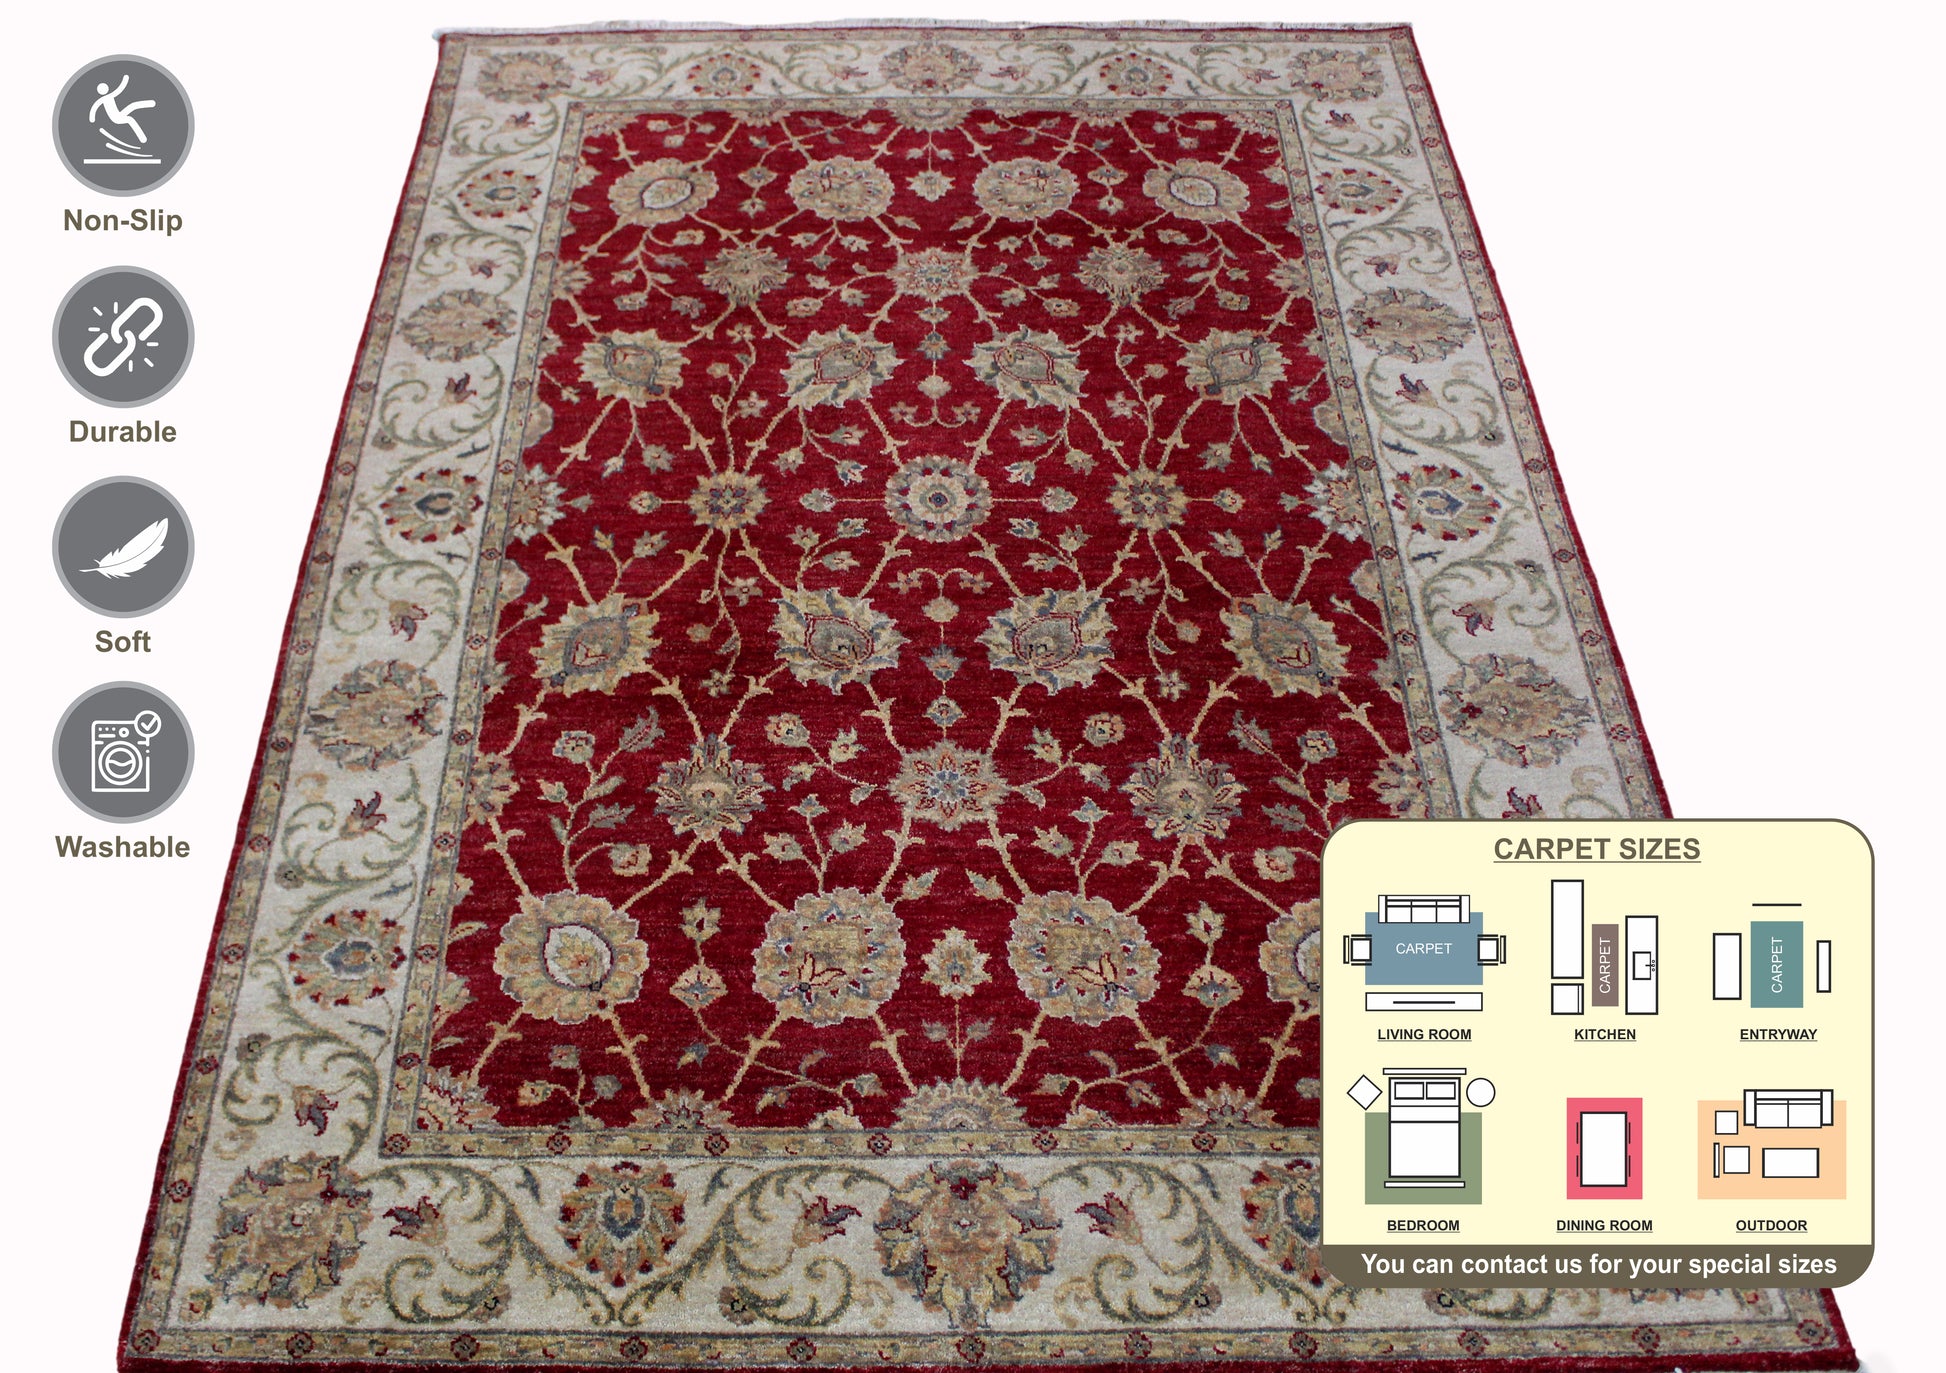 Sultanabad Area Rug 281cm x 184cm